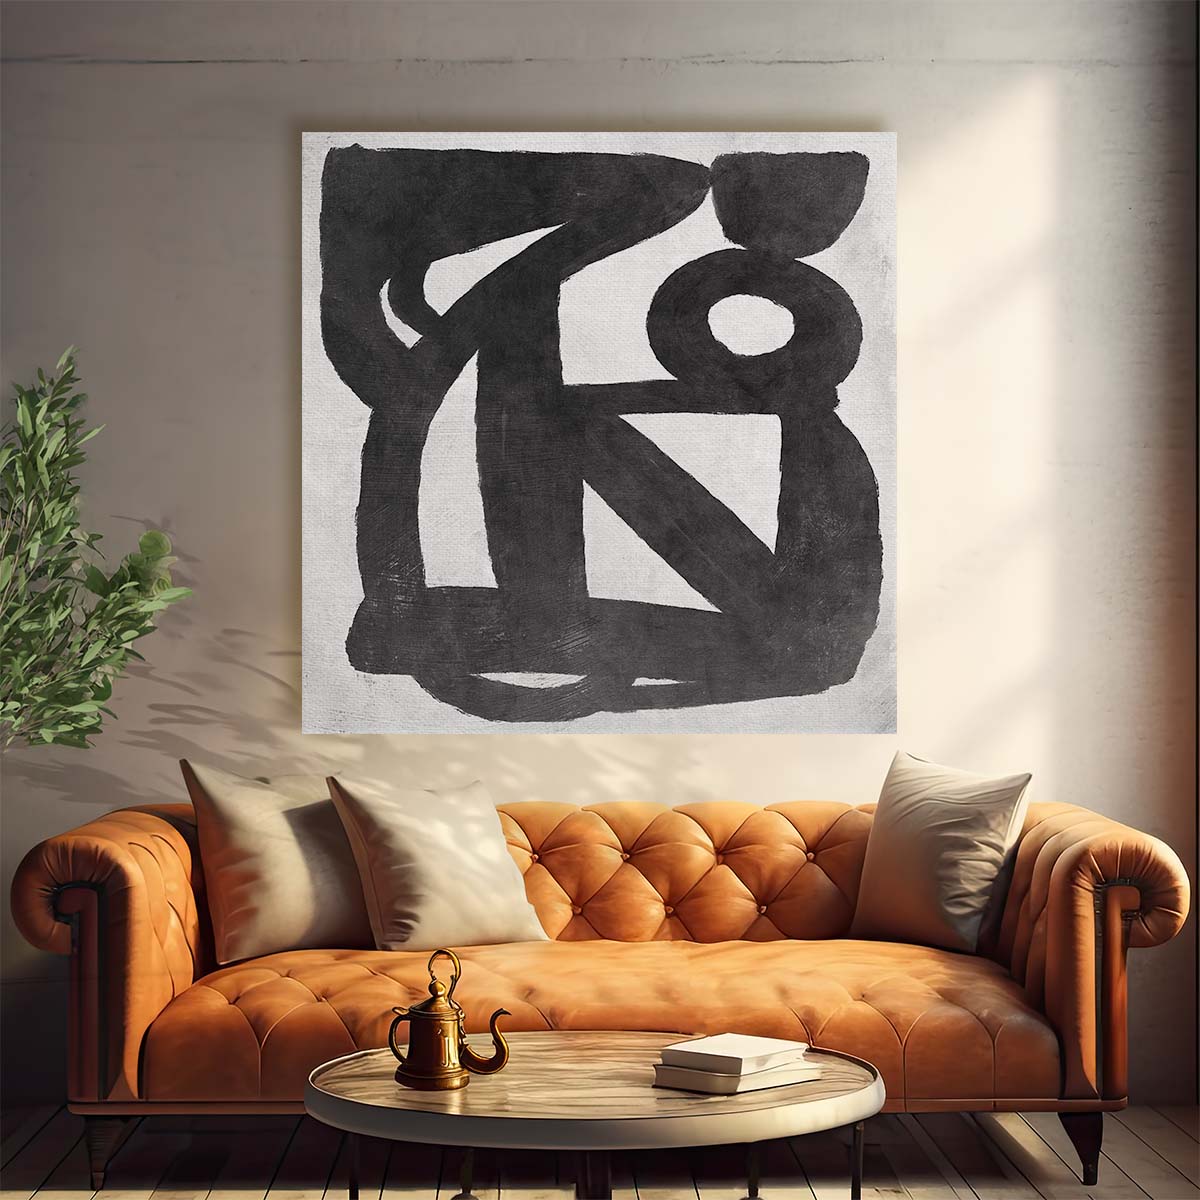 Dan Hobday's "Modern Abstract Melody No. 4" Painted Illustration Wall Art by Luxuriance Designs. Made in USA.